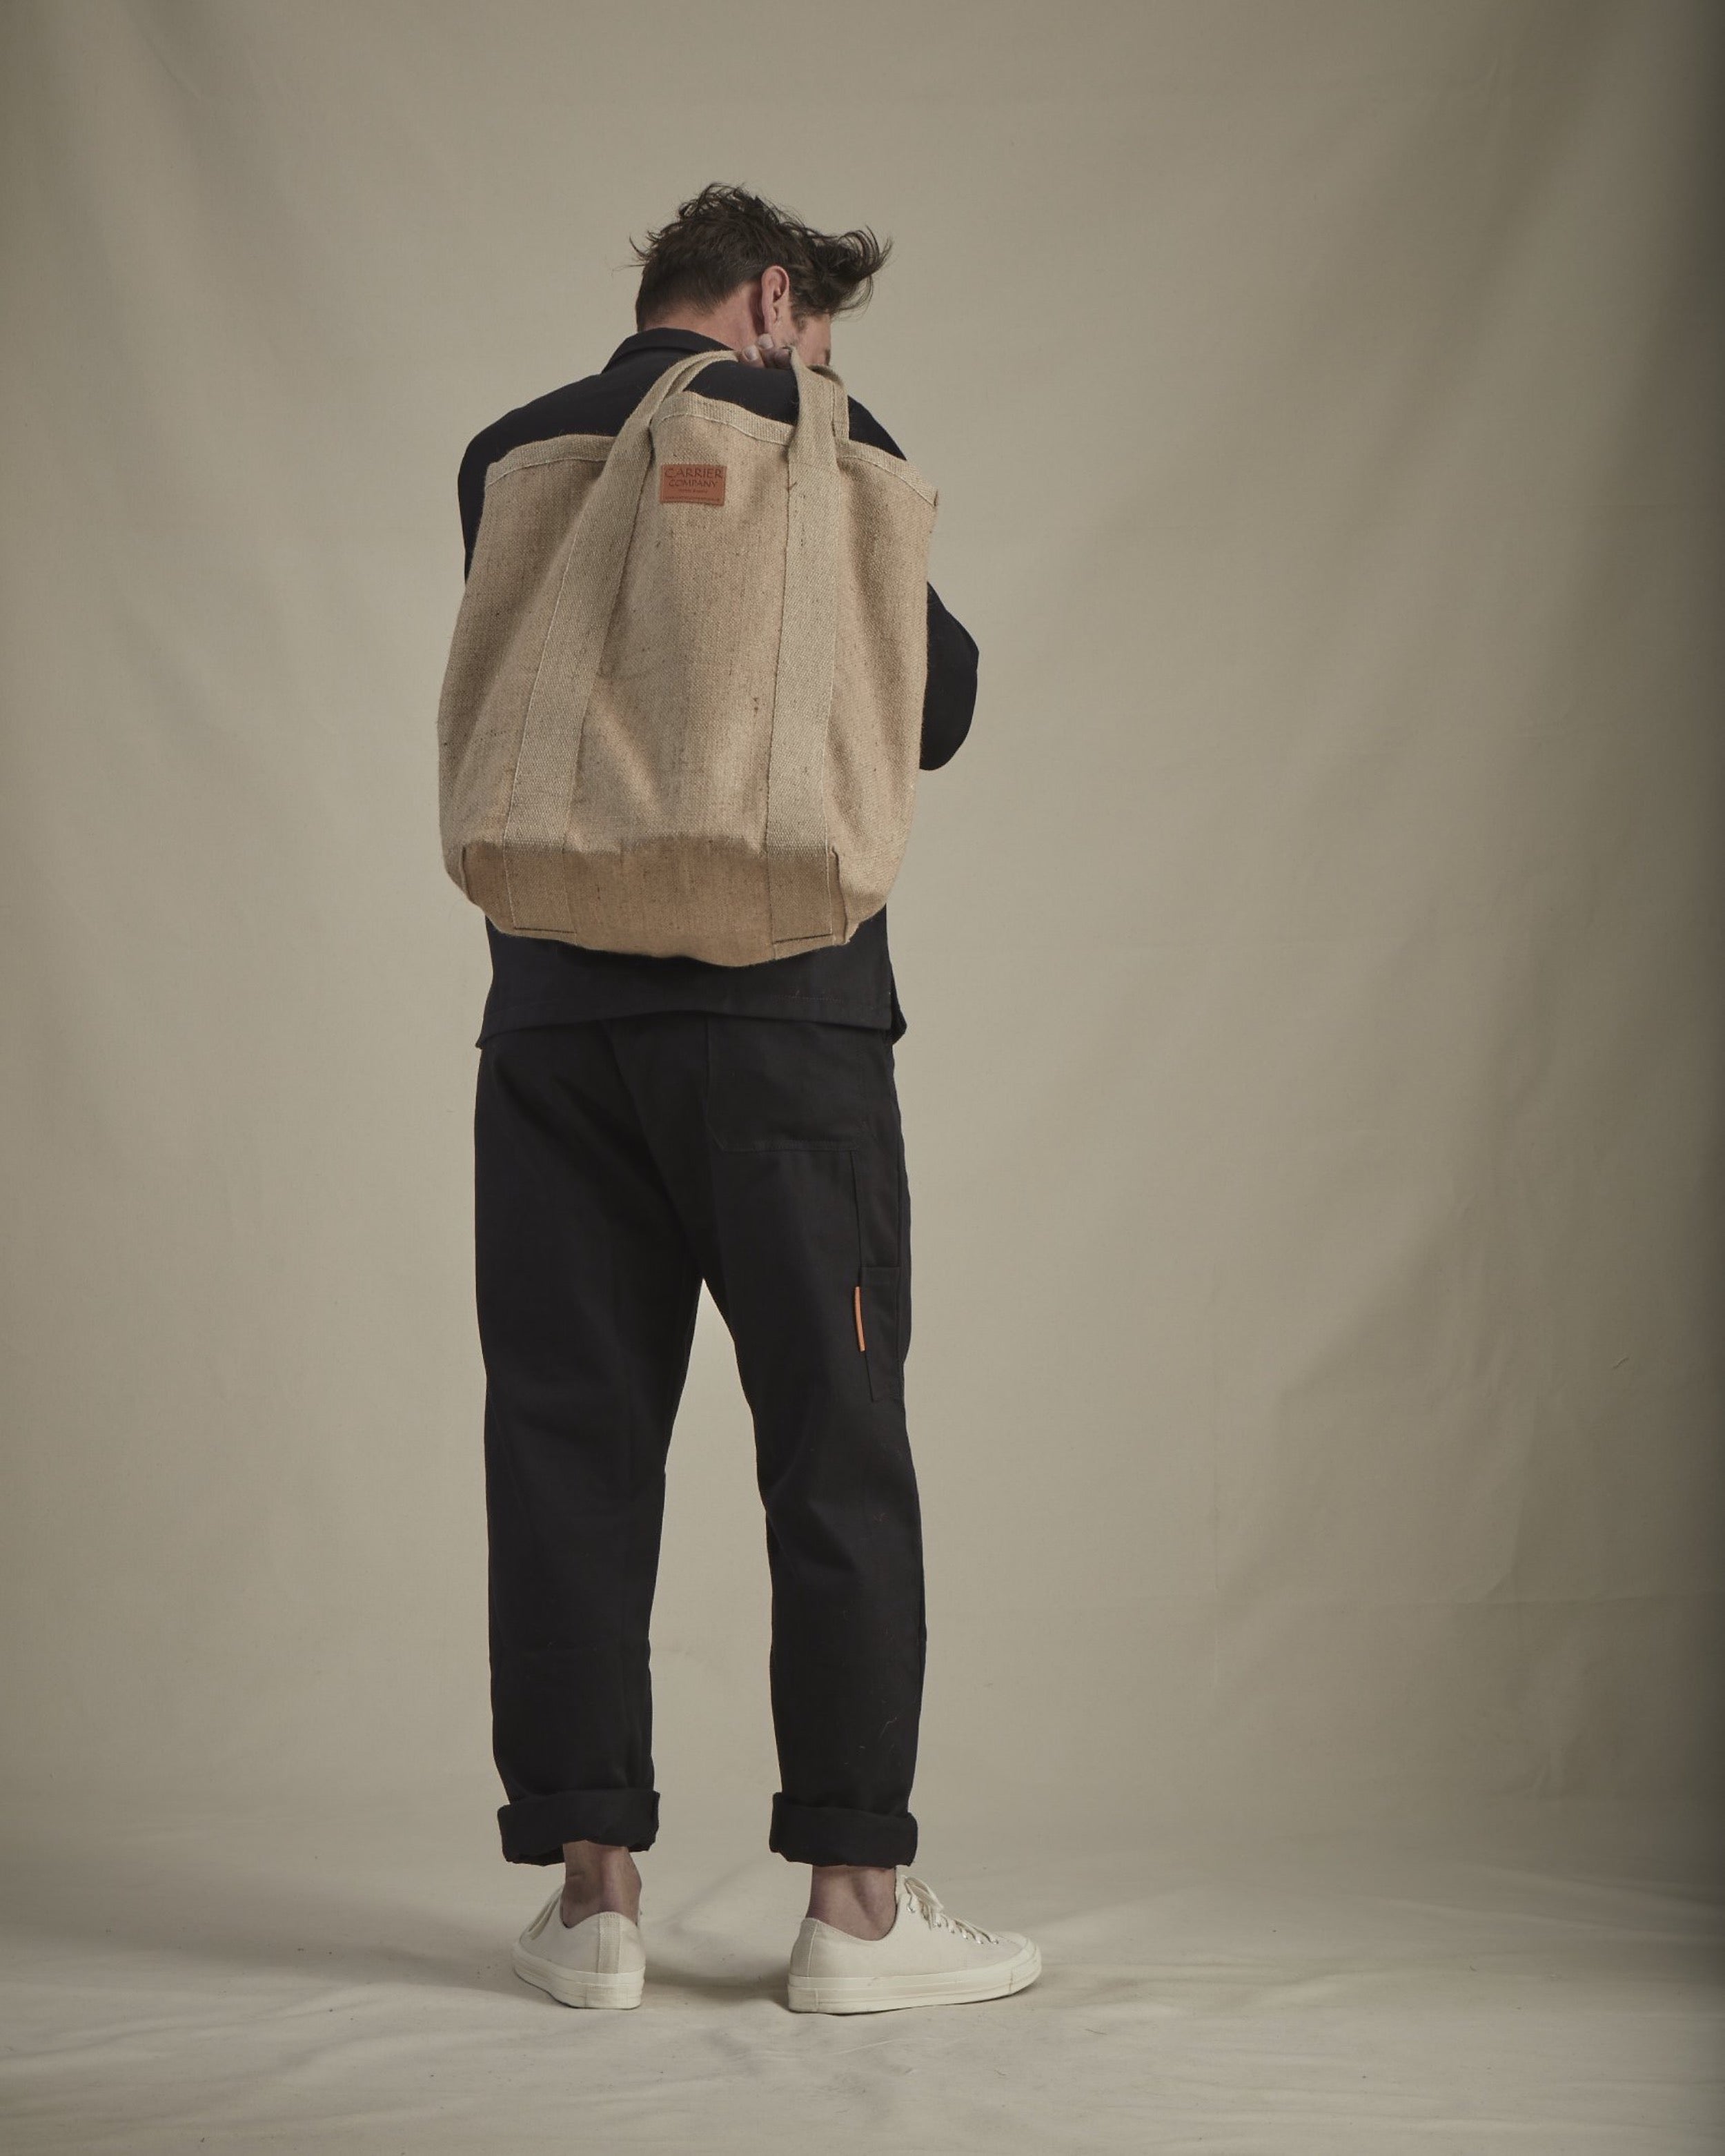 Man wearing Carrier Company Men's Work Trouser in Black and Holding Jute Market Bag